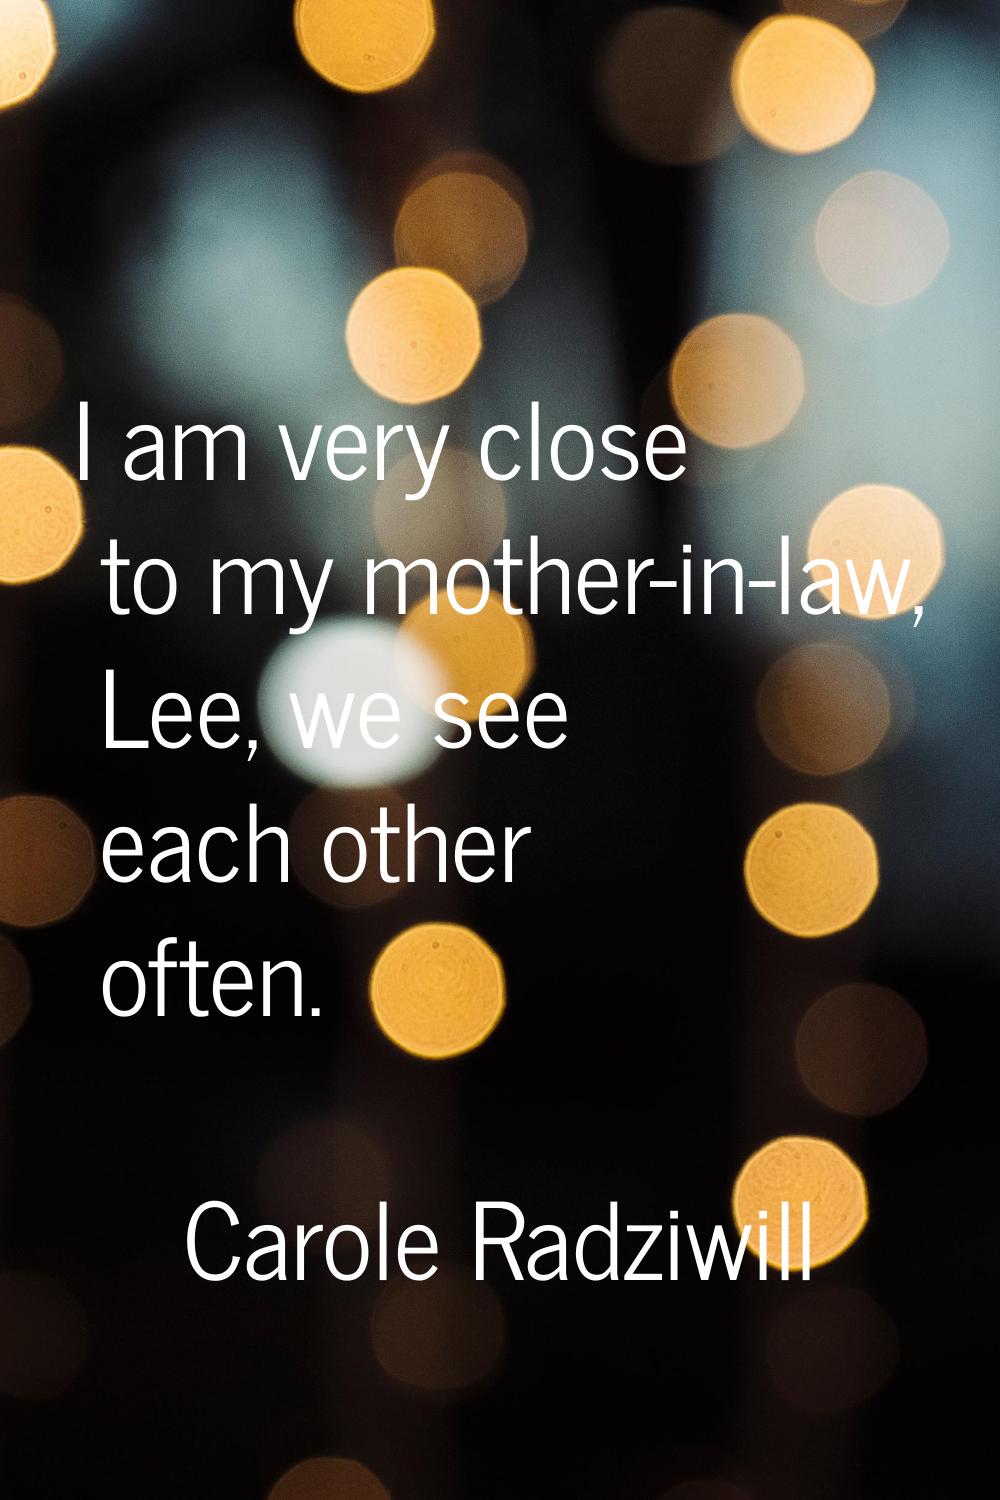 I am very close to my mother-in-law, Lee, we see each other often.